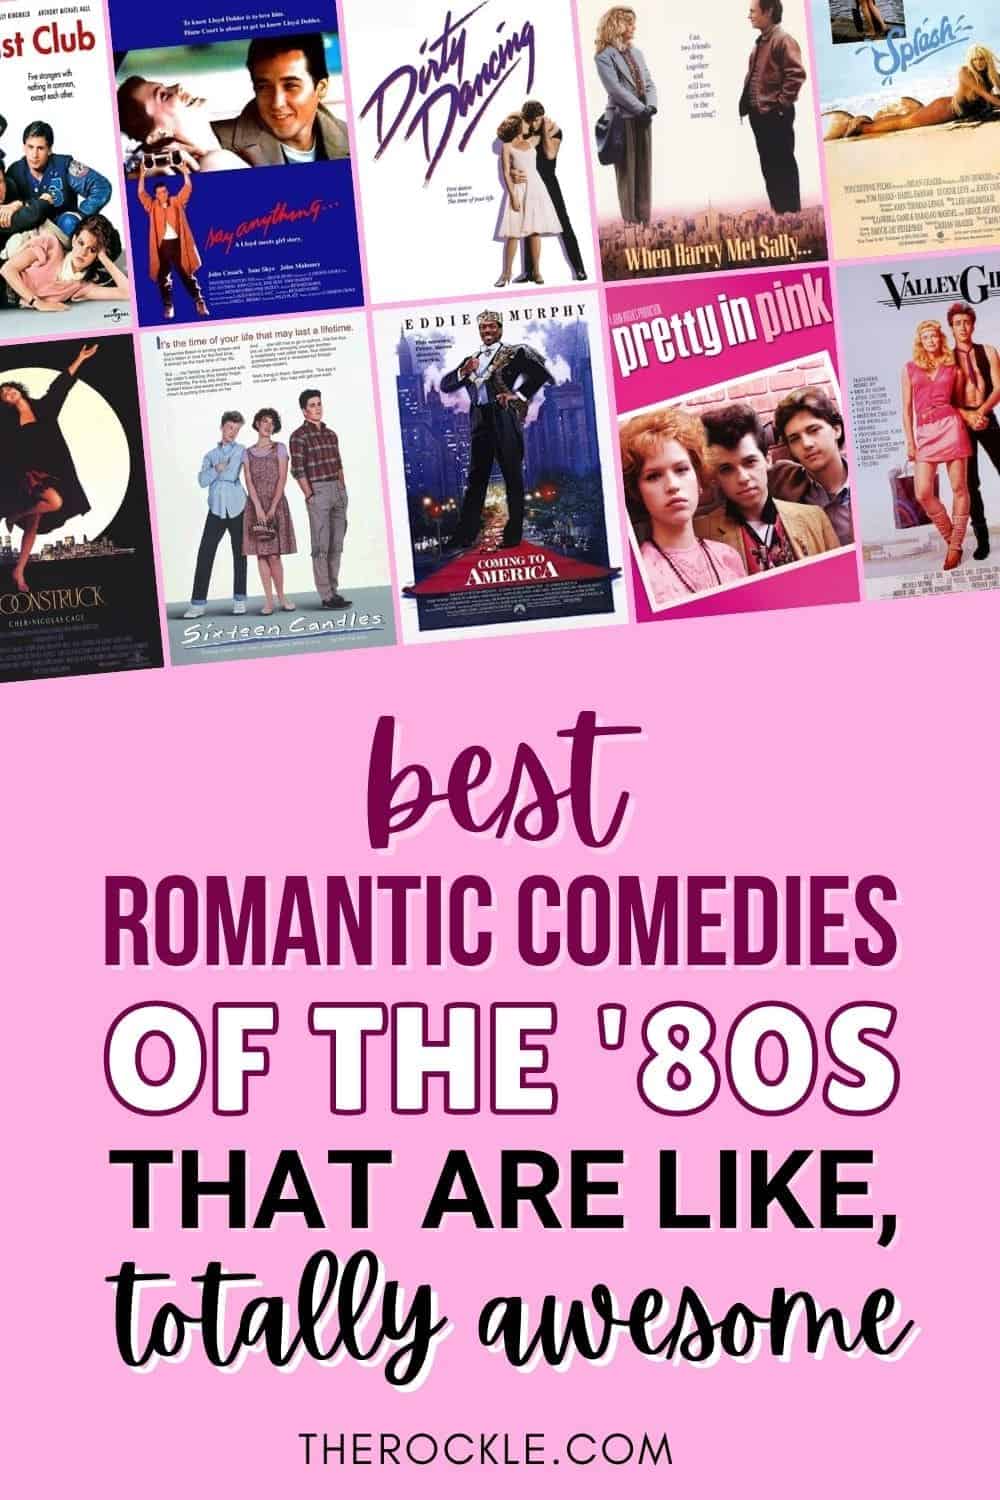 https://therockle.com/wp-content/uploads/2021/03/The-Best-Romantic-Comedies-Of-The-80s-min.jpg